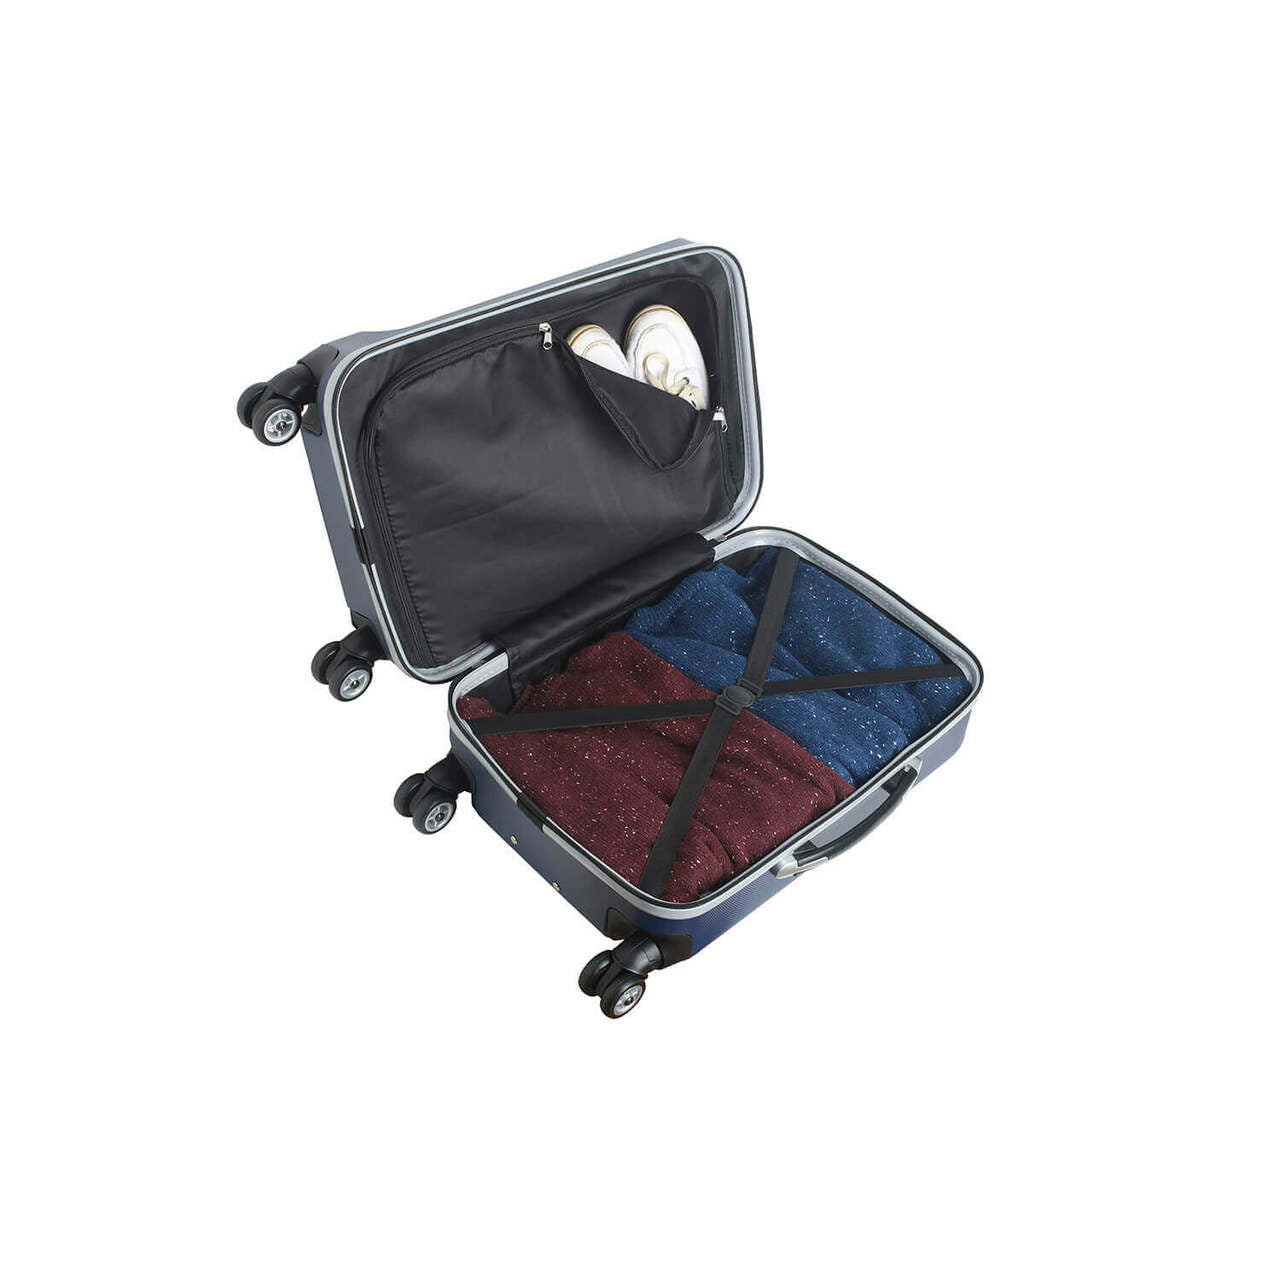 Personalized Initial Name letter "P" 20 inches Carry on Hardcase Spinner Luggage by Mojo in NAVY